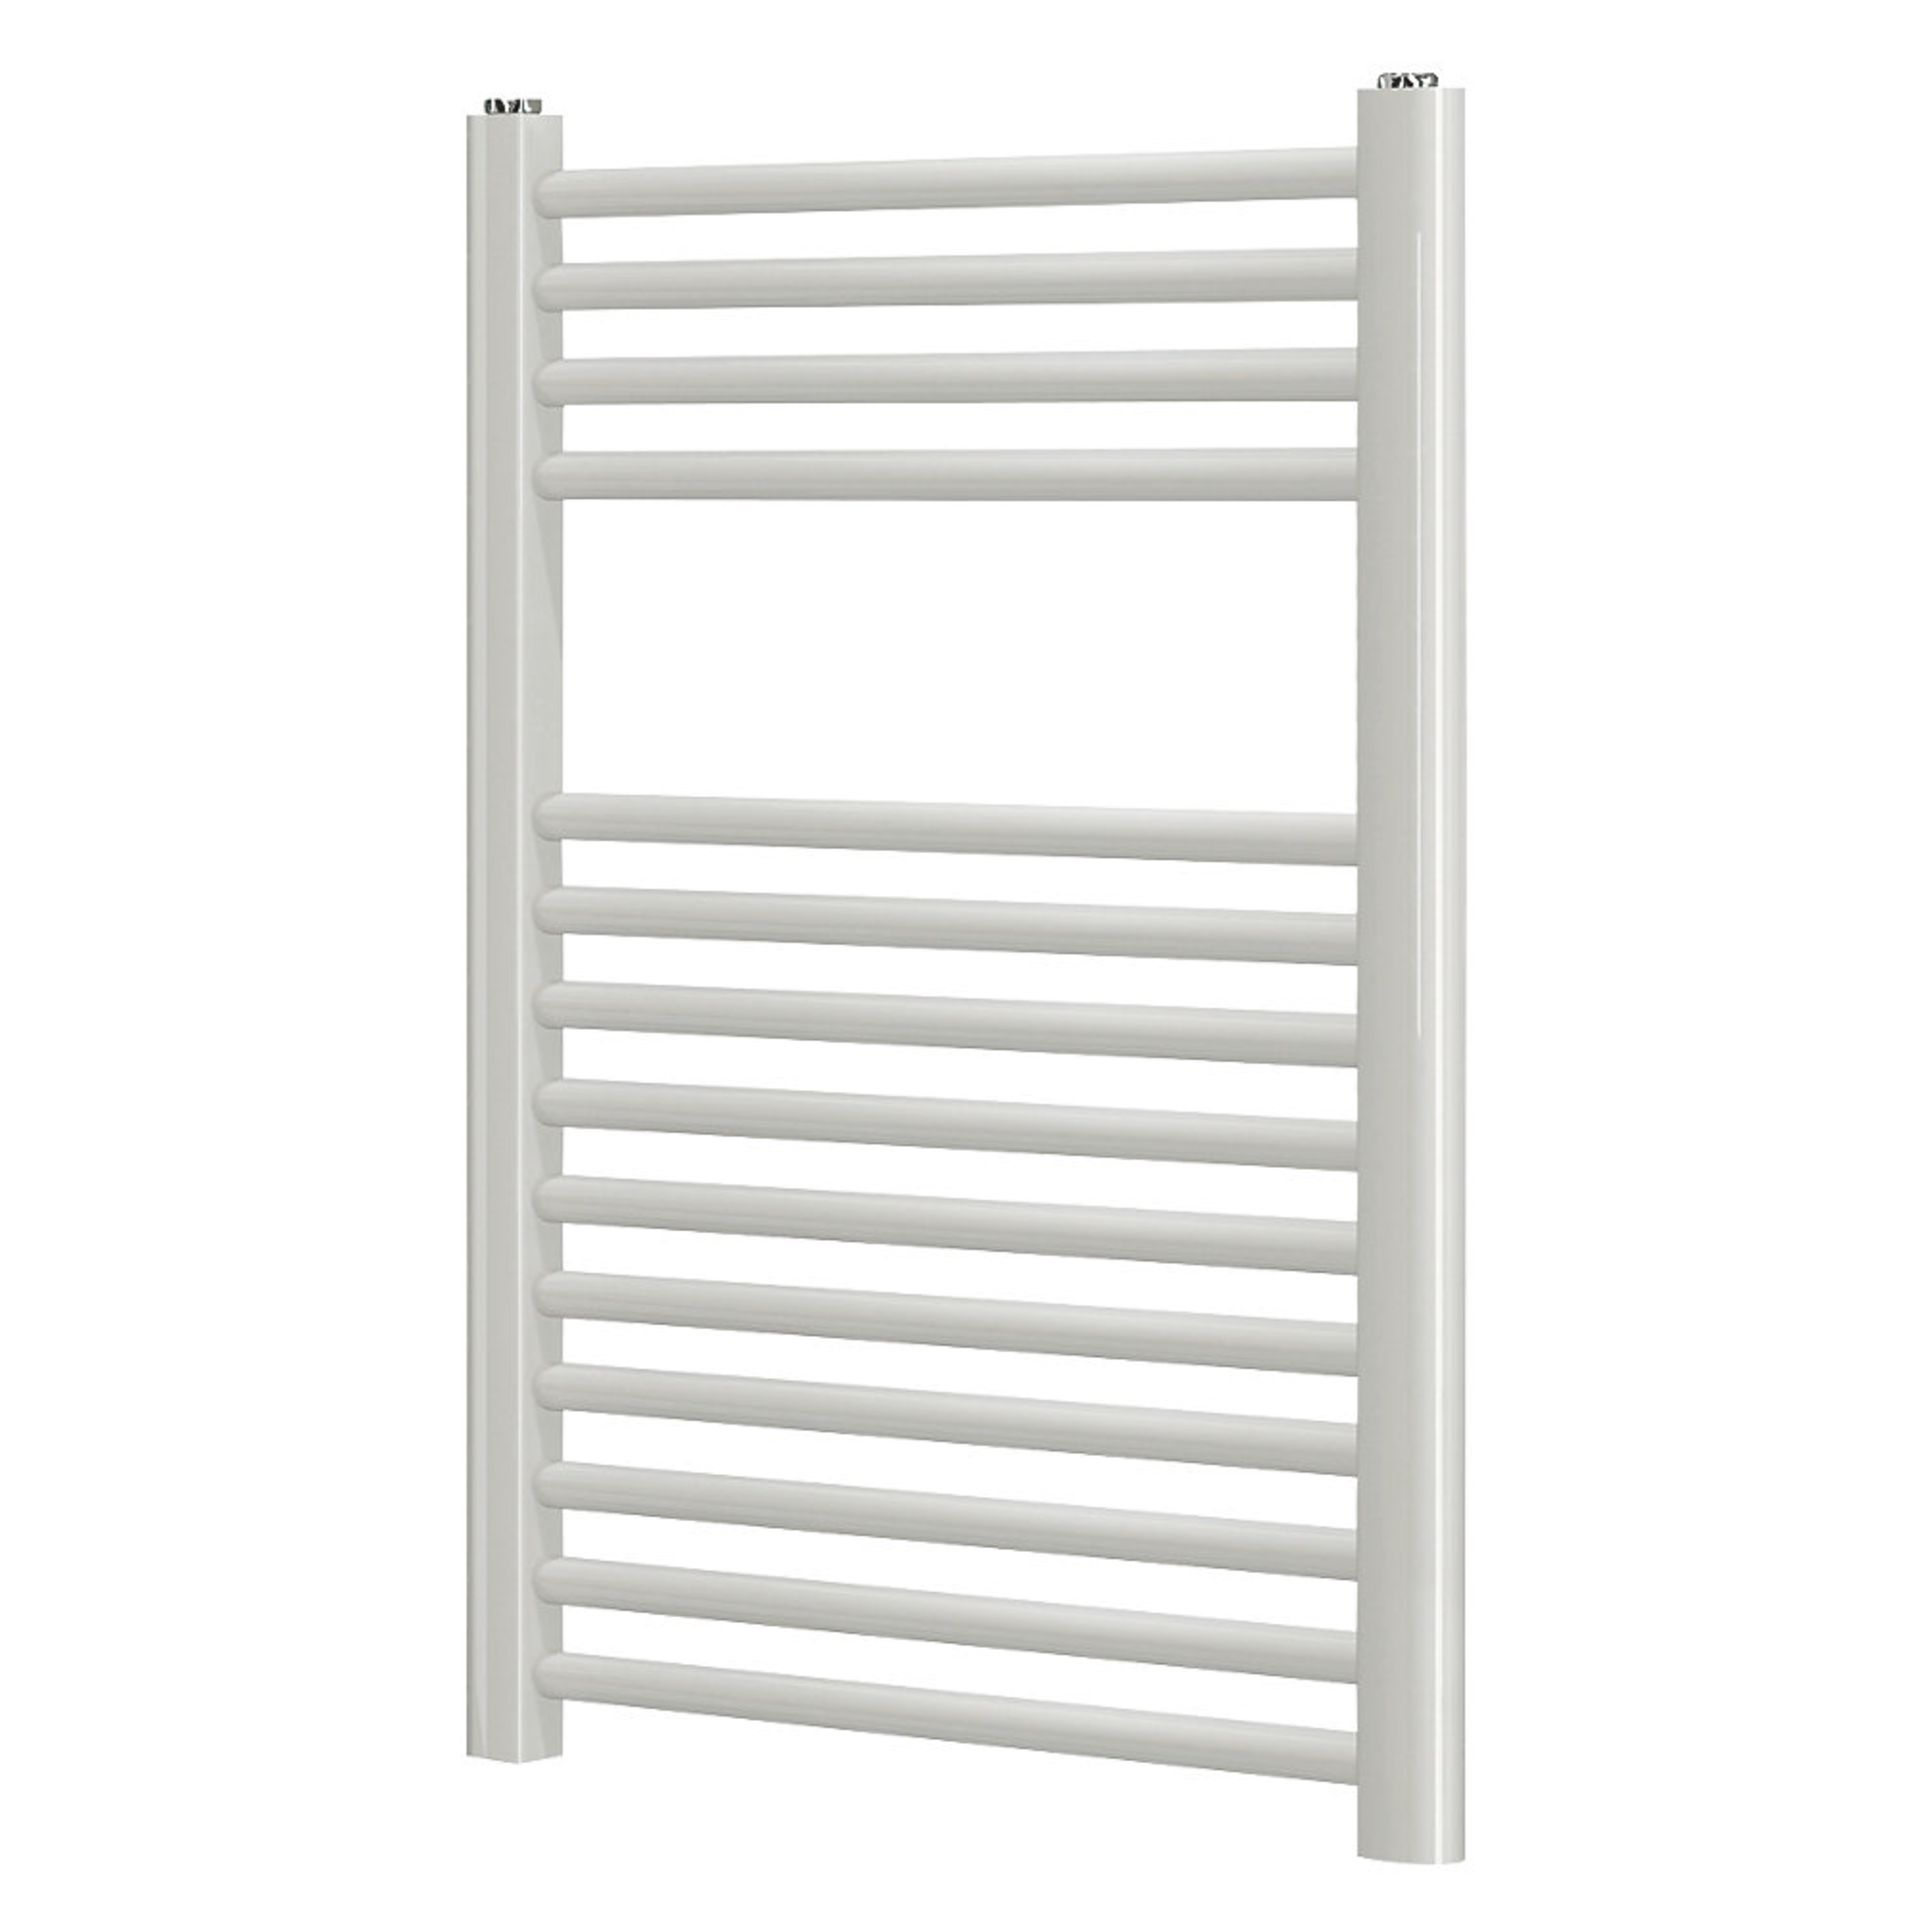 (QW215) 700x400mm TOWEL RADIATOR WHITE. High quality powder-coated steel construction. _Condition: